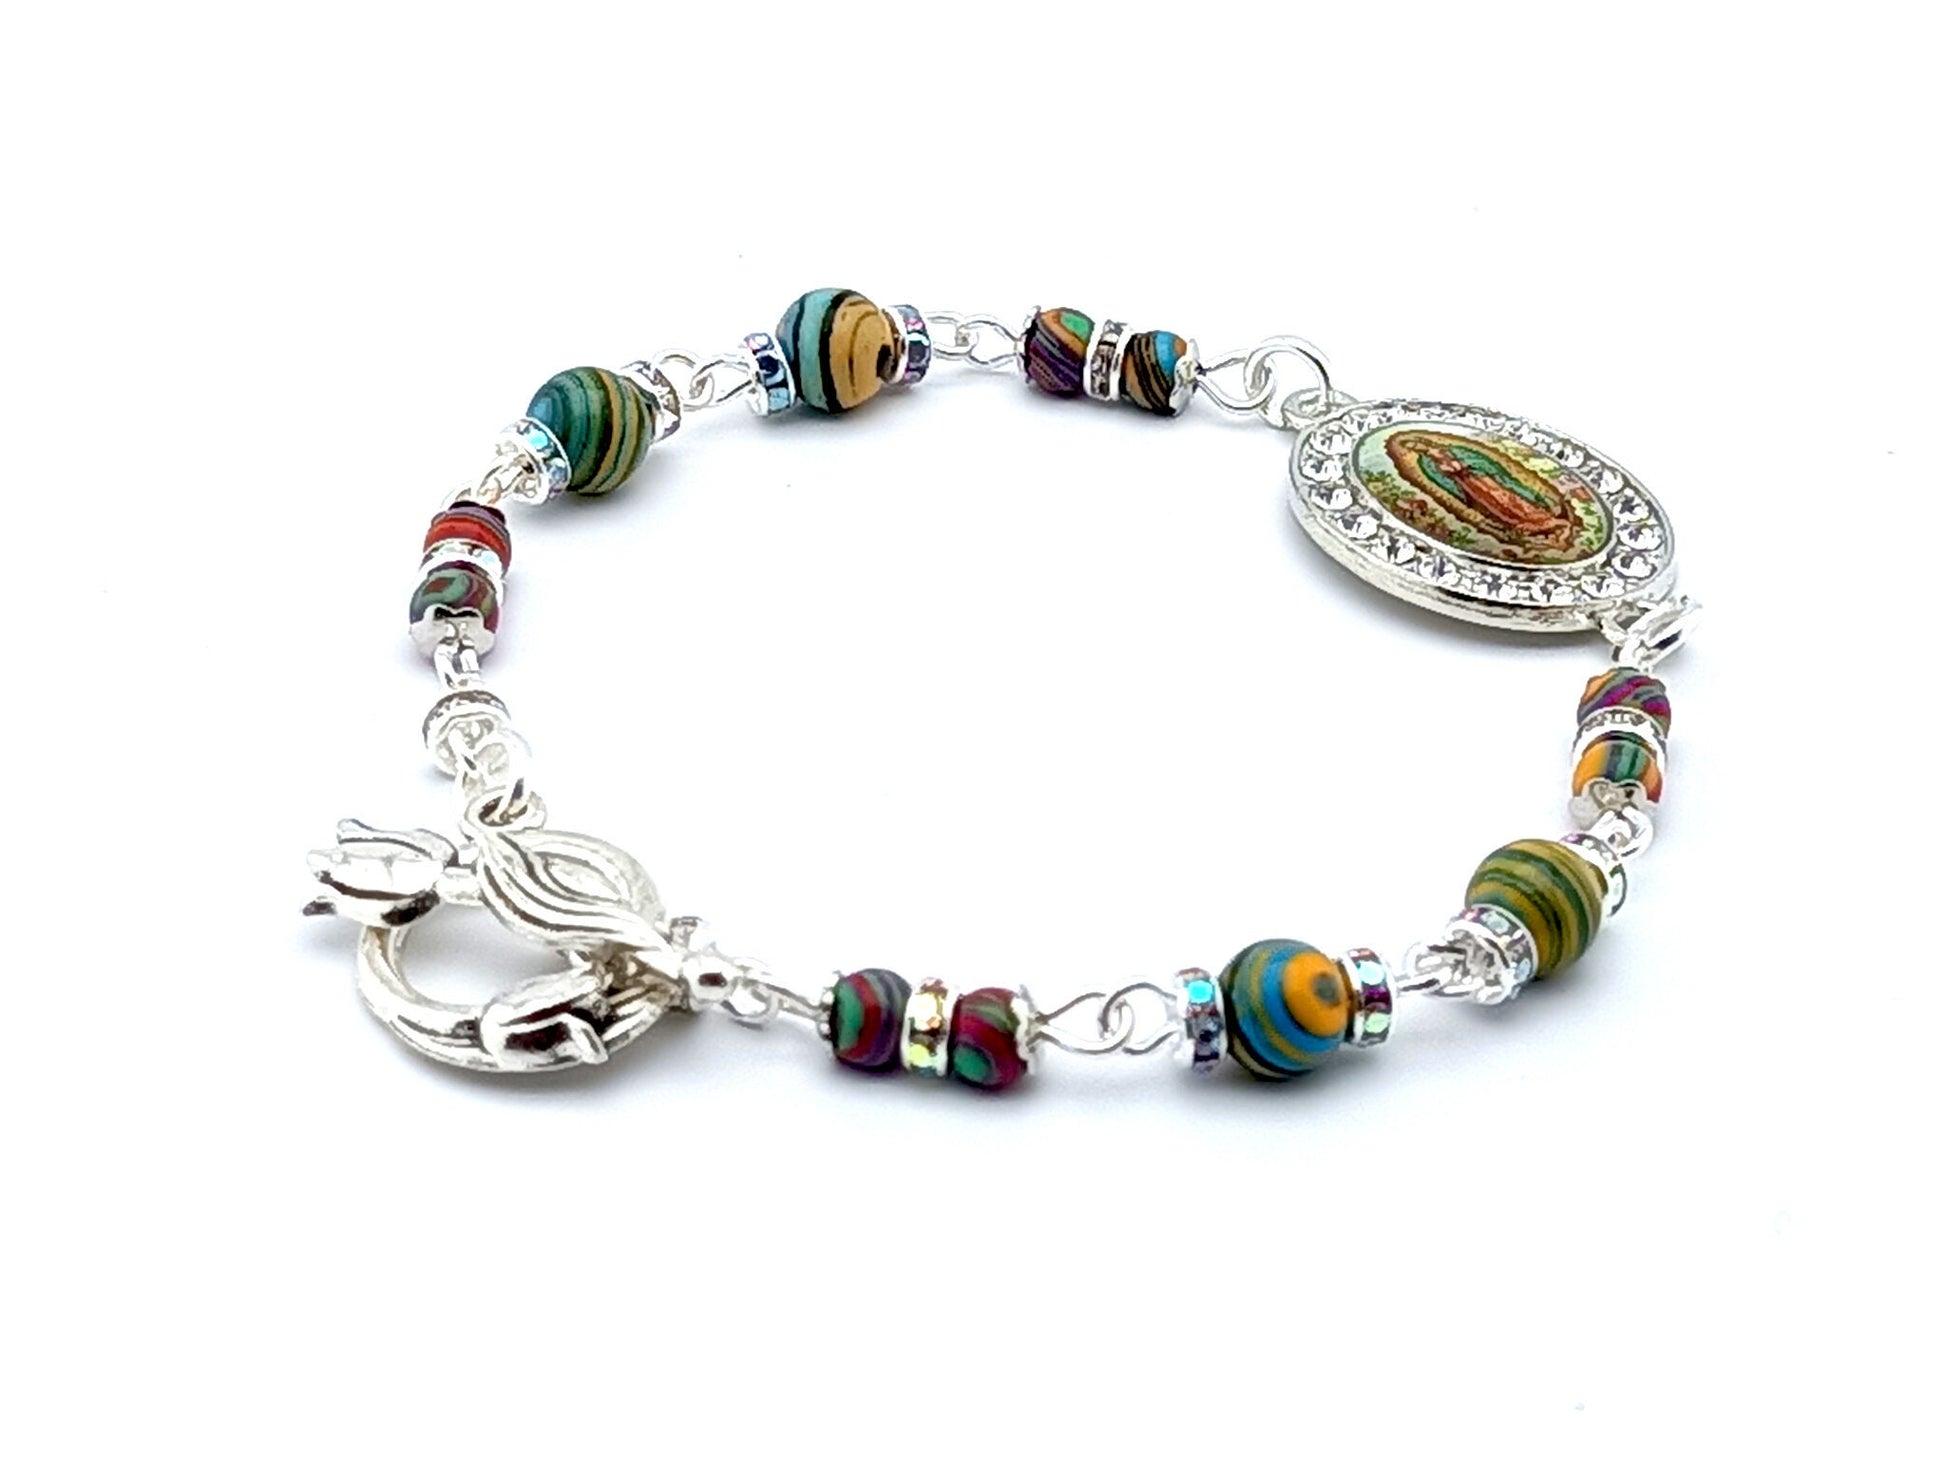 Our Lady of Guadalupe unique rosary beads with multicoloured gemstone beads, silver clasp and picture medal.